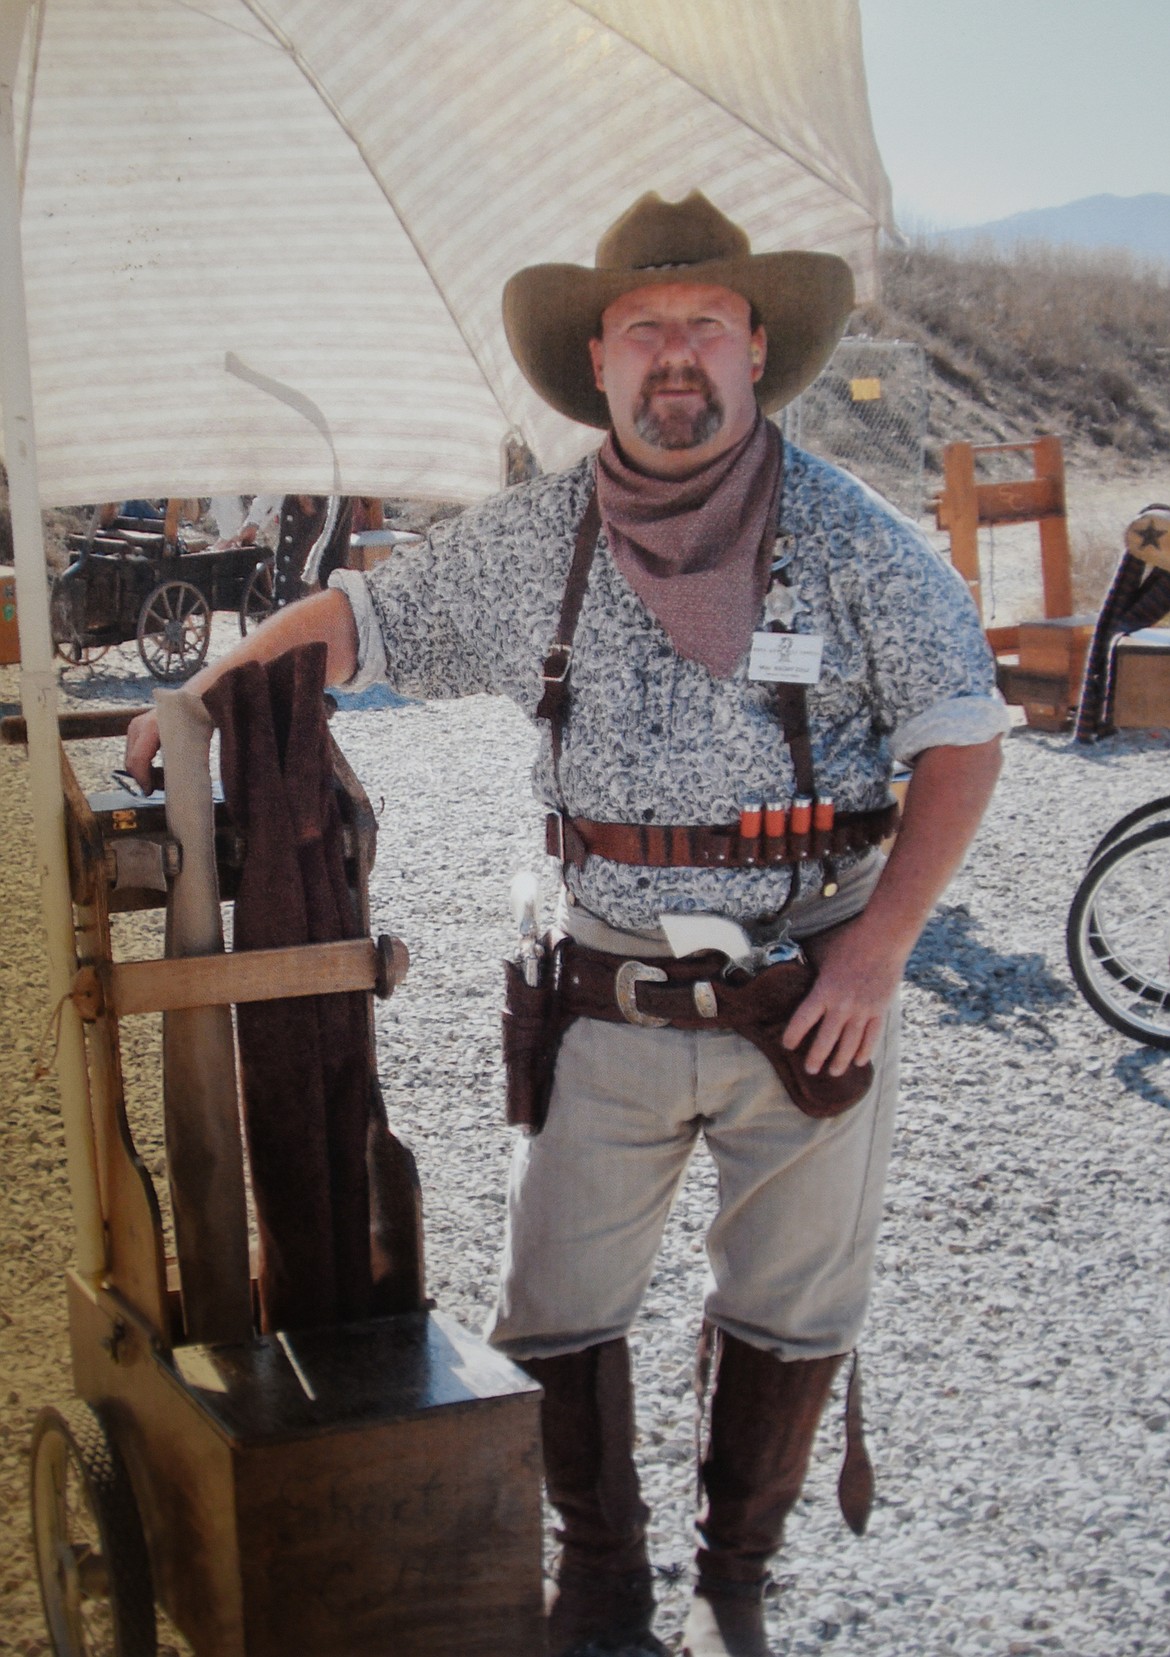 Richard Cheney is shown during his days as a cowboy action shooter. (Photo provided)